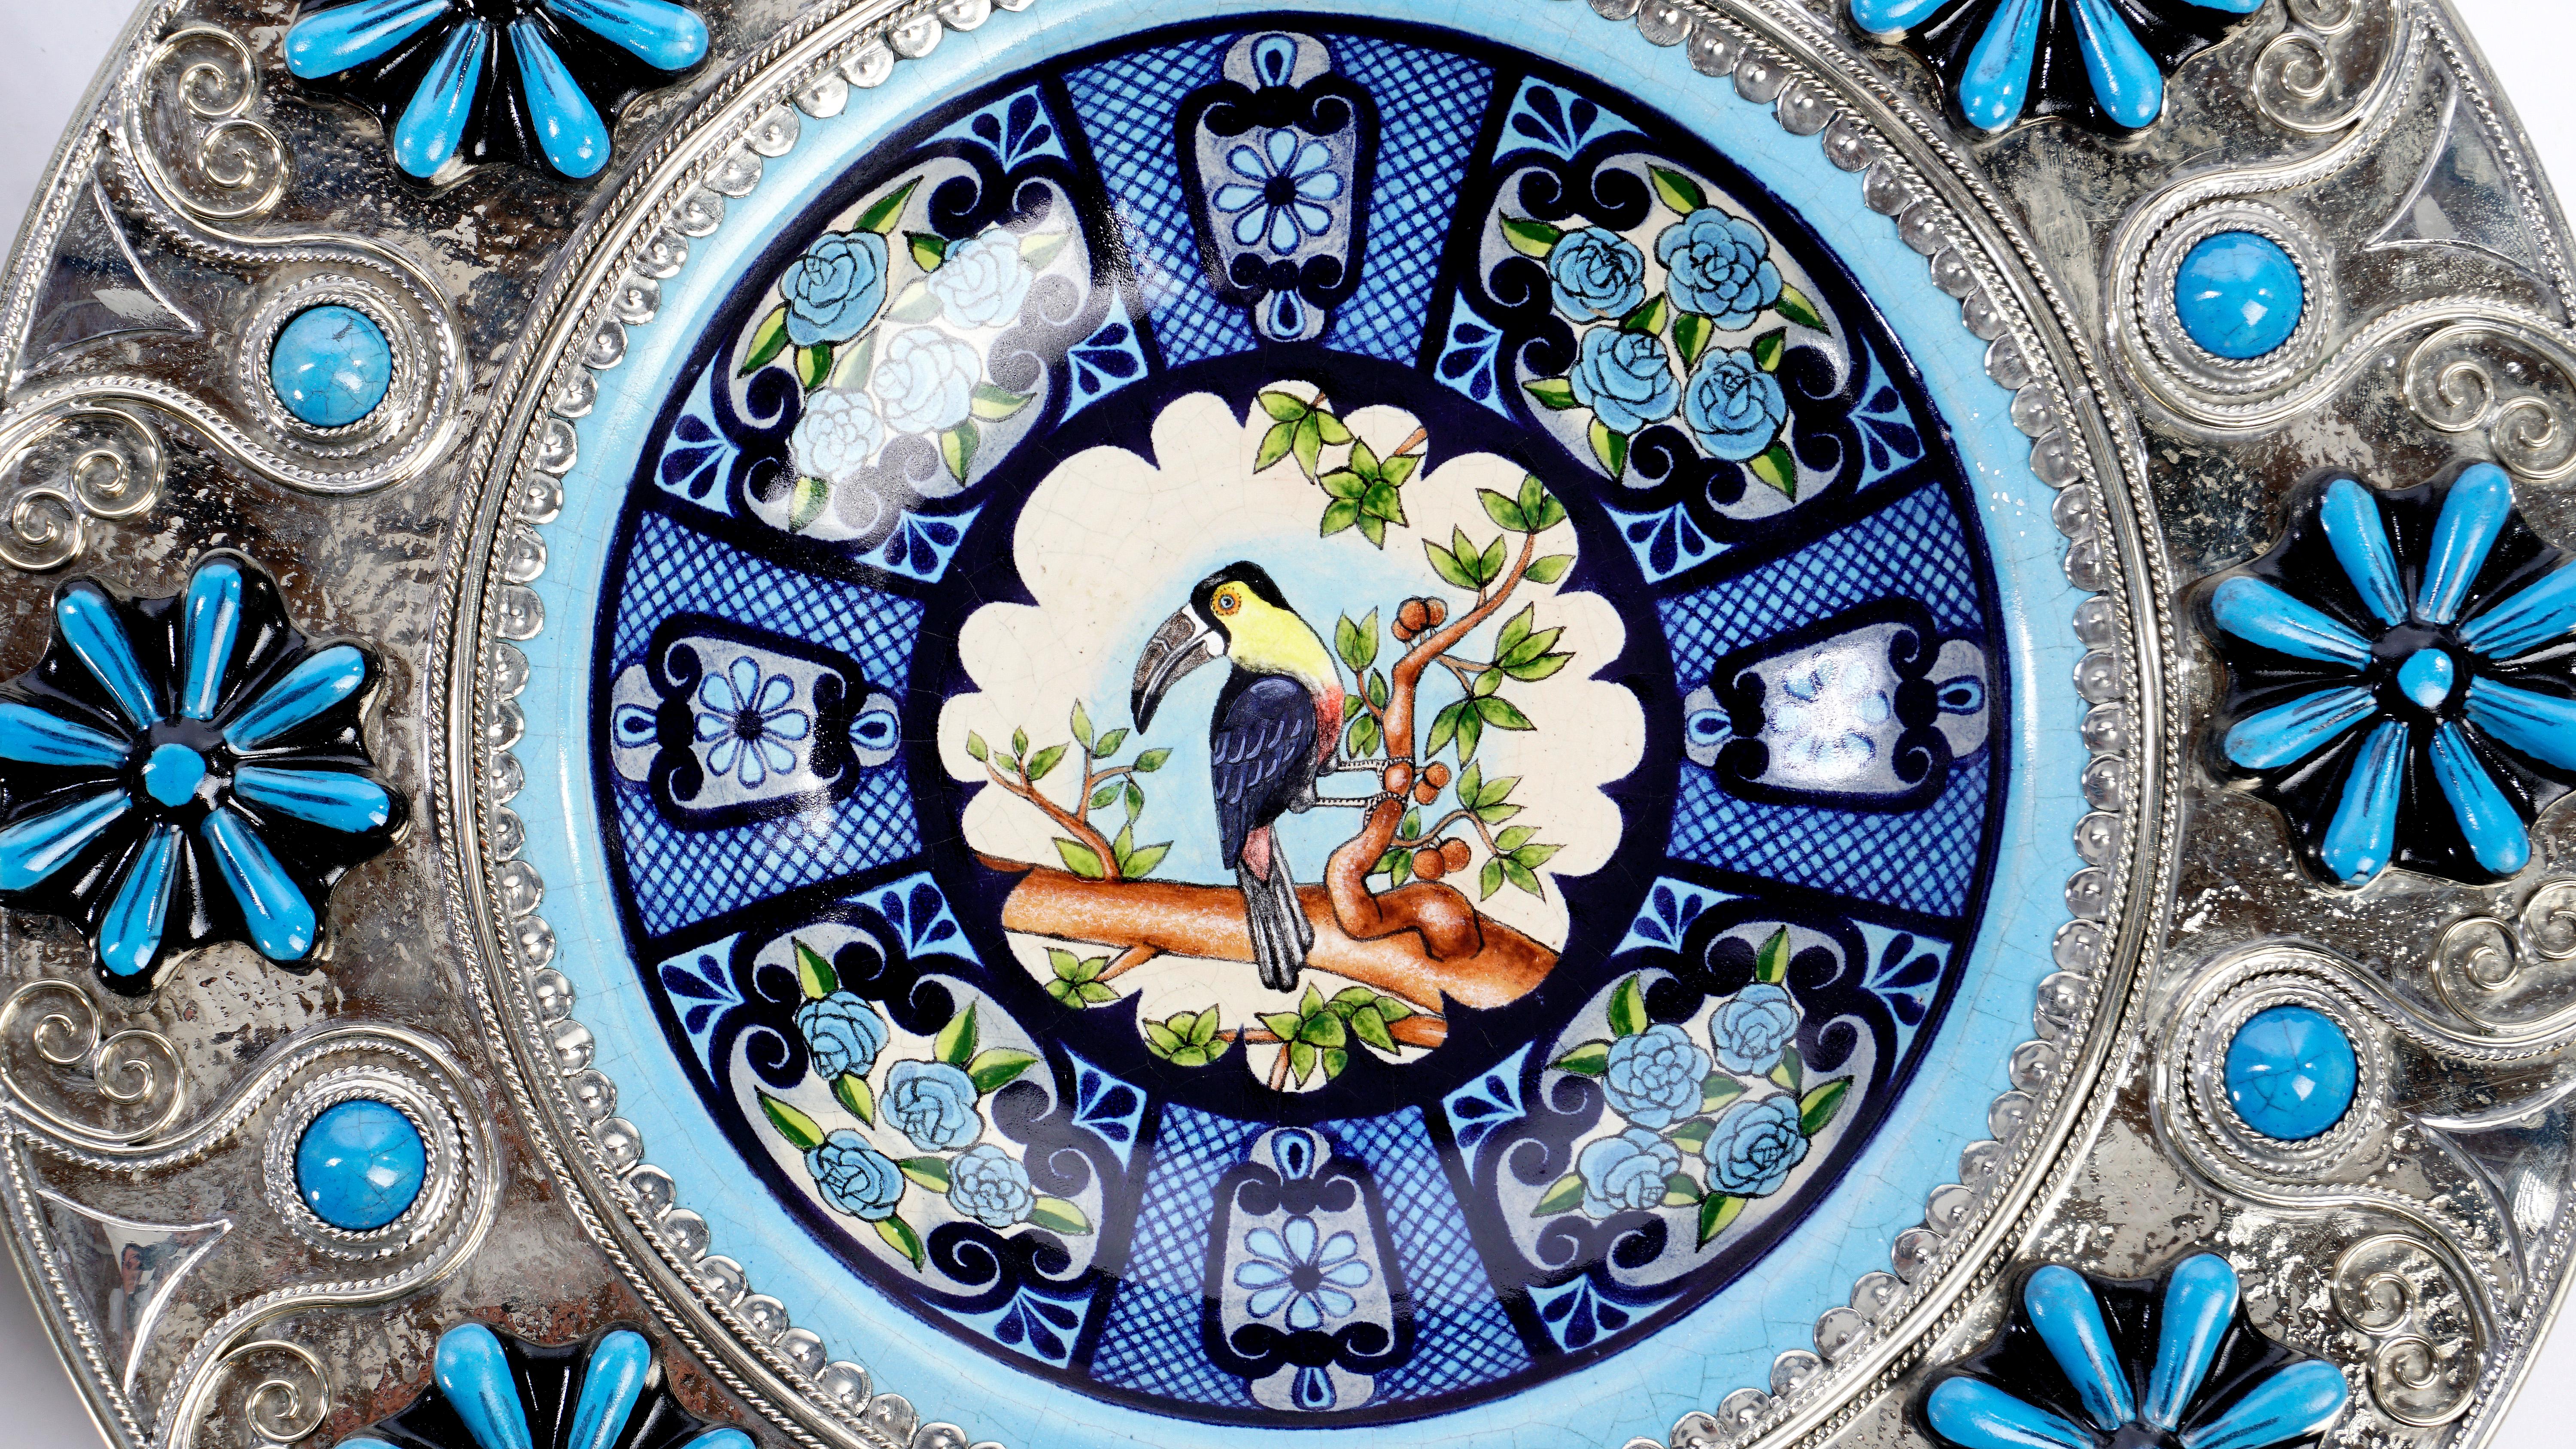 Contemporary Ceramic and White Metal 'Alpaca' Toucans and Parrot Set of Plates